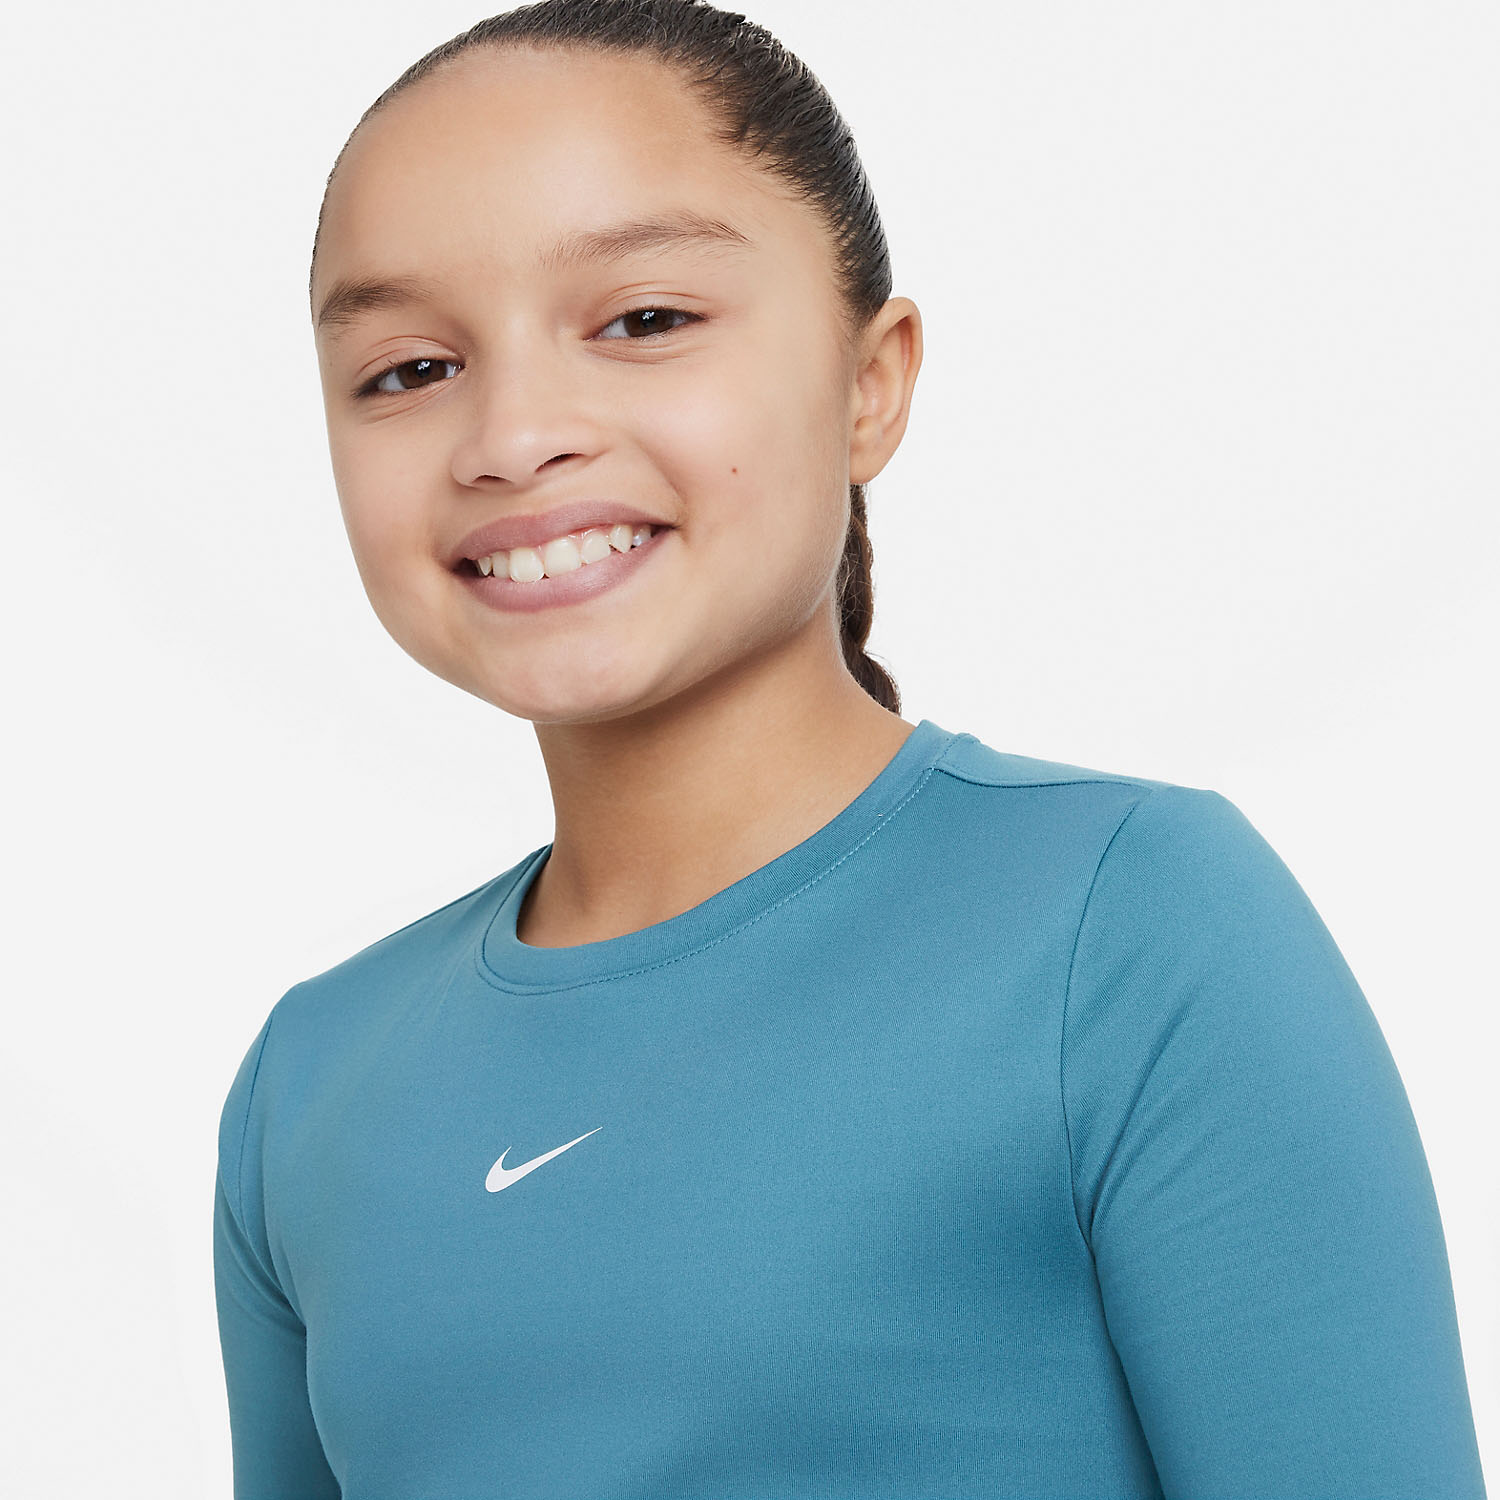 Nike Therma-FIT One Girl's Tennis Shirt - Mineral Teal/White